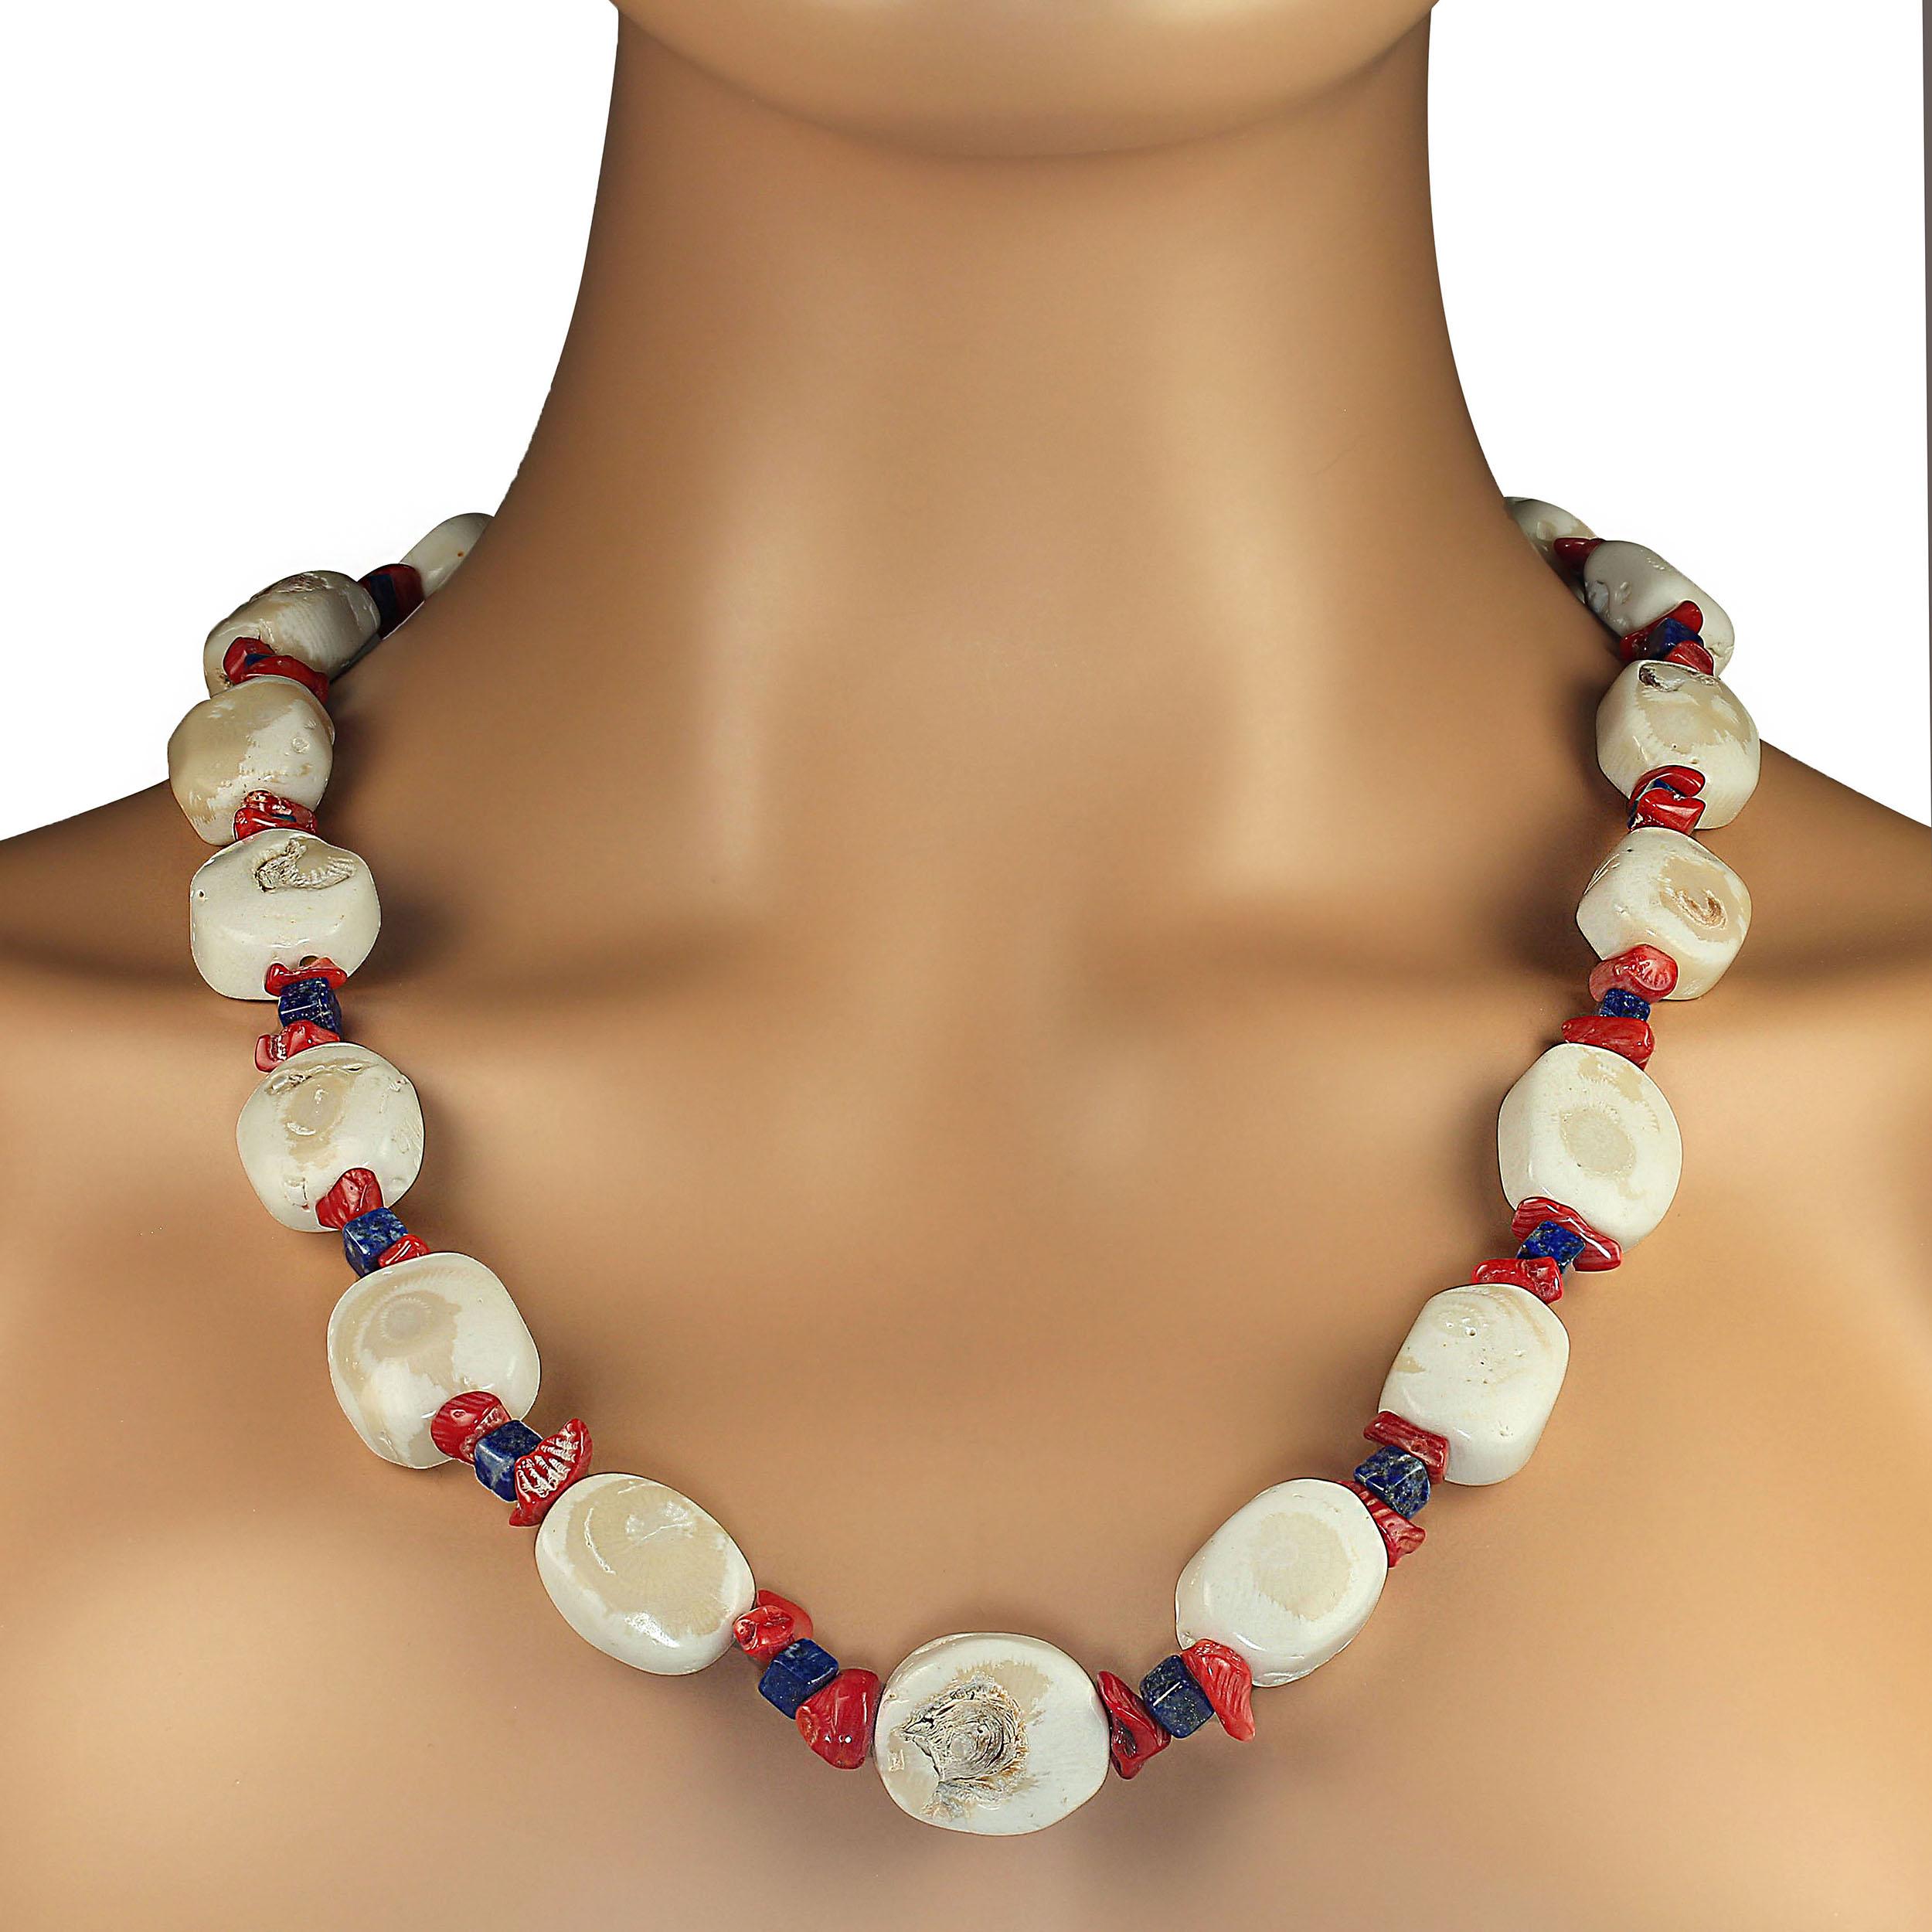 32 Inch patriotic necklace of white bamboo coral nuggets, chips of polished red bamboo coral, and squares of polished blue lapis lazuli.  How much more patriotic can you be?  This unique 32-inch necklace is just the thing for spring and summer. It